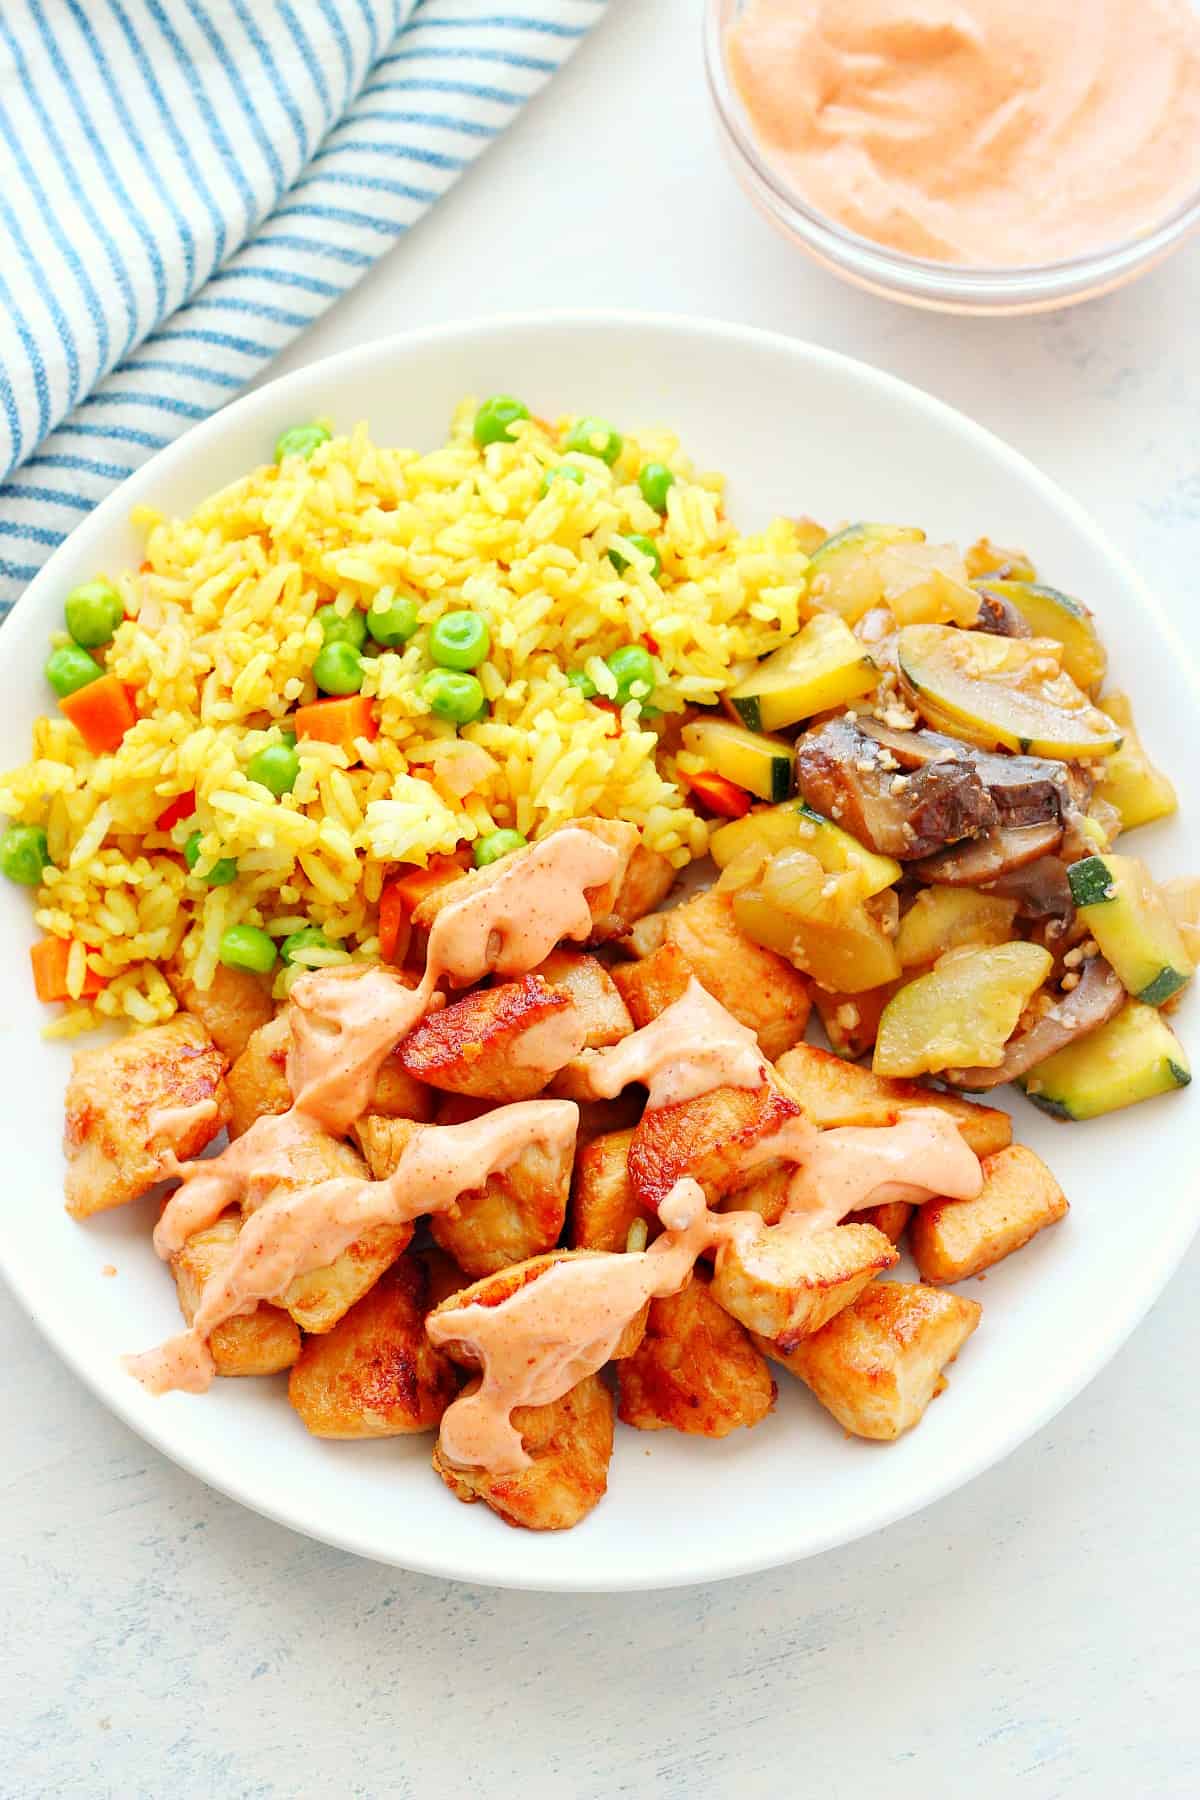 Chicken, fried rice and sauteed veggies on a plate. 